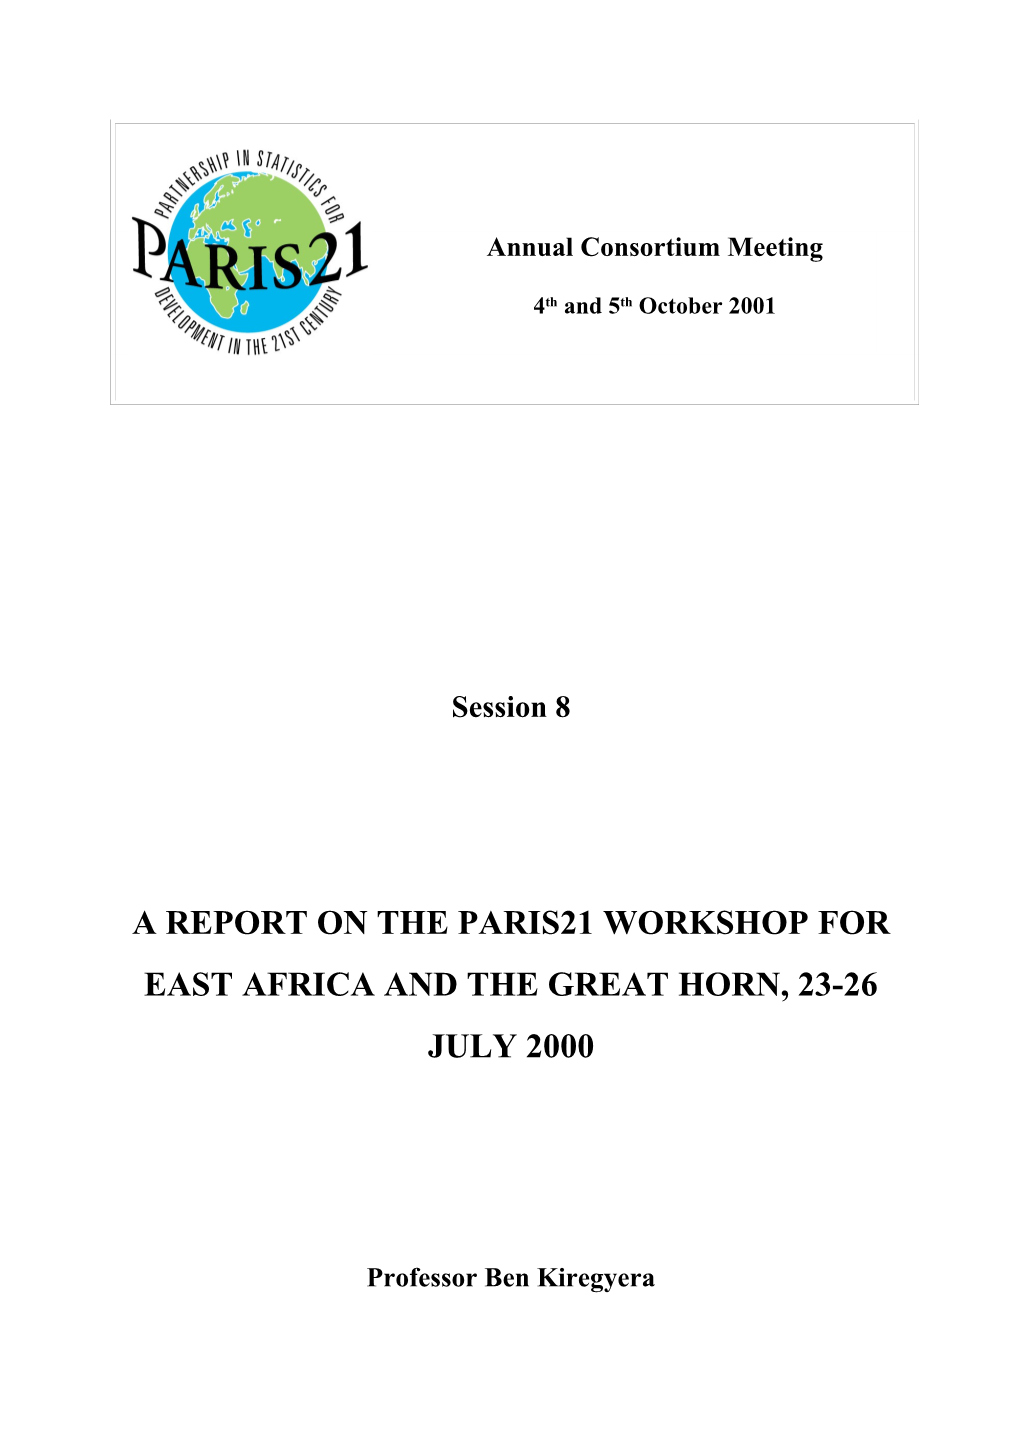 A Report on the Paris21 Workshop for East Africa and the Great Horn, 23-26 July 2000